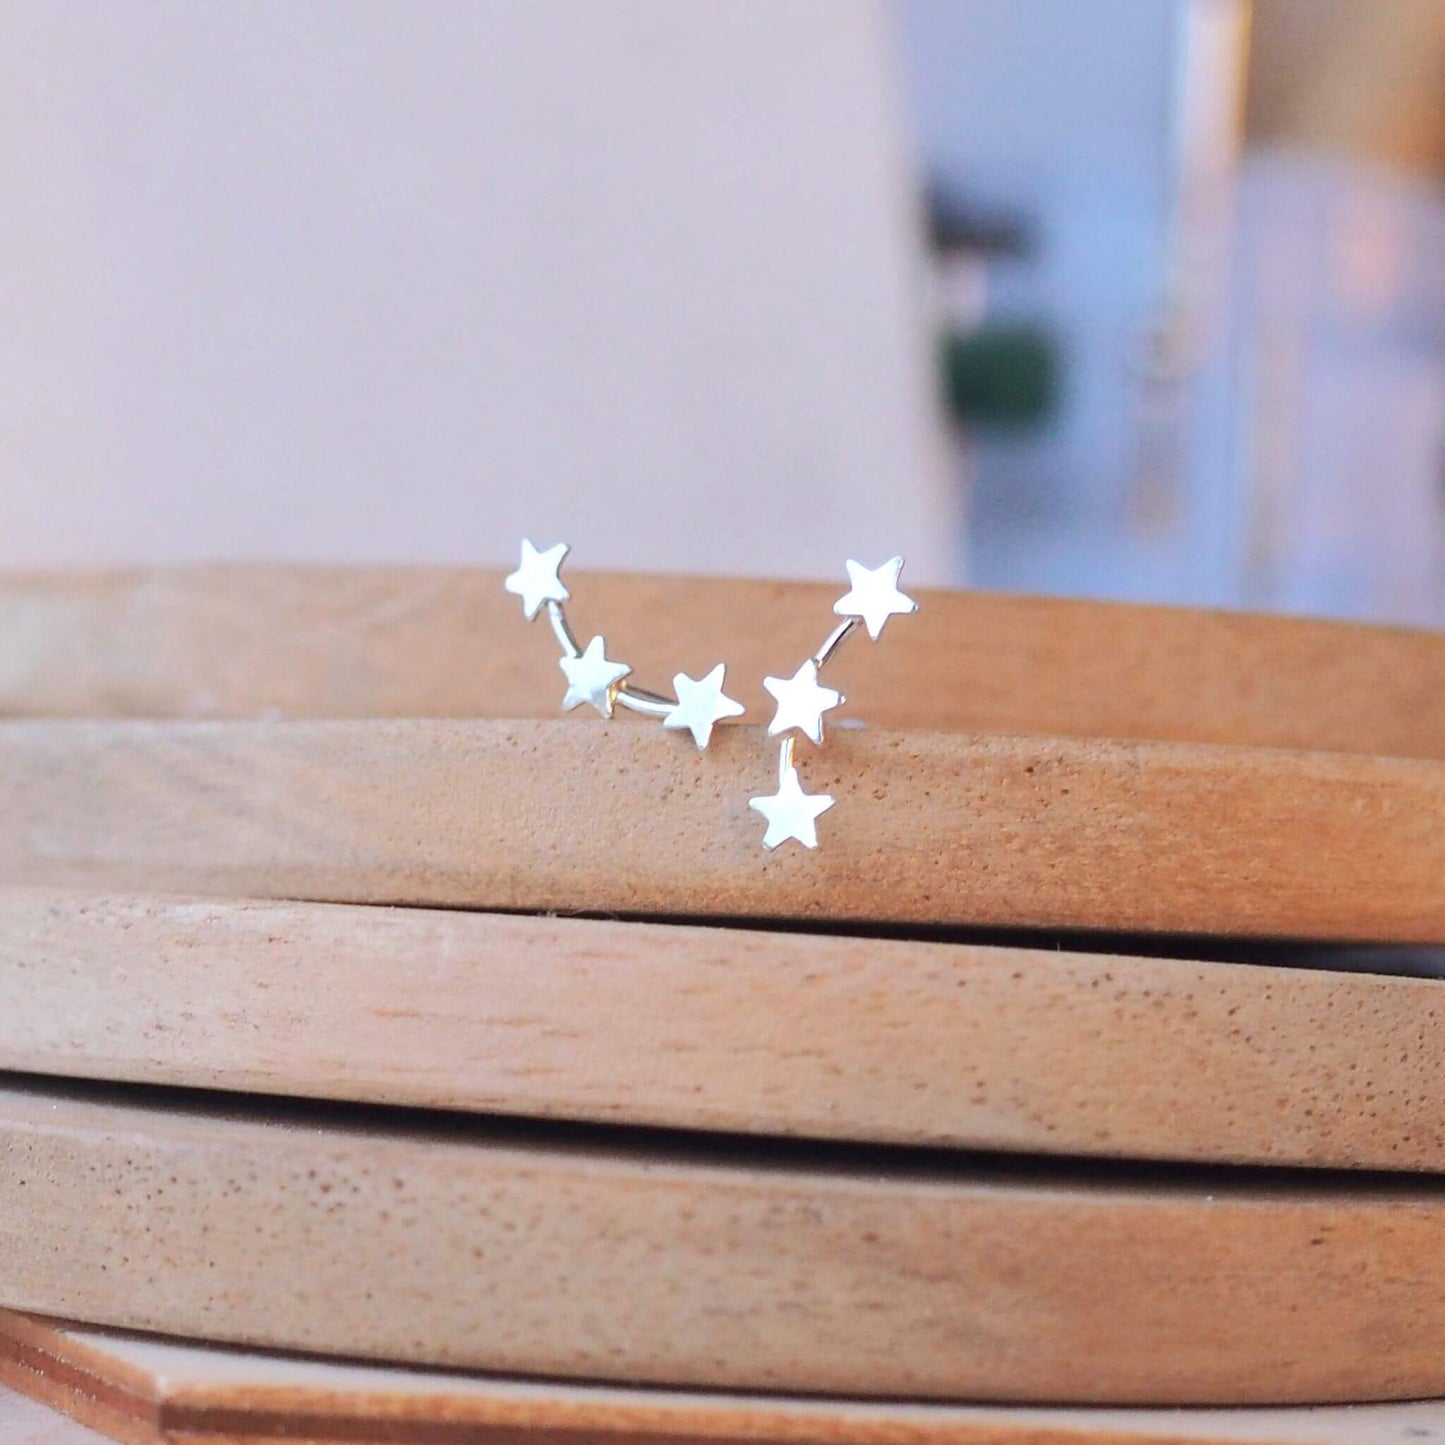 very simple star climber earrings amde from sterling silver with a row of three small silver stars on a thin wire like a star consolation.